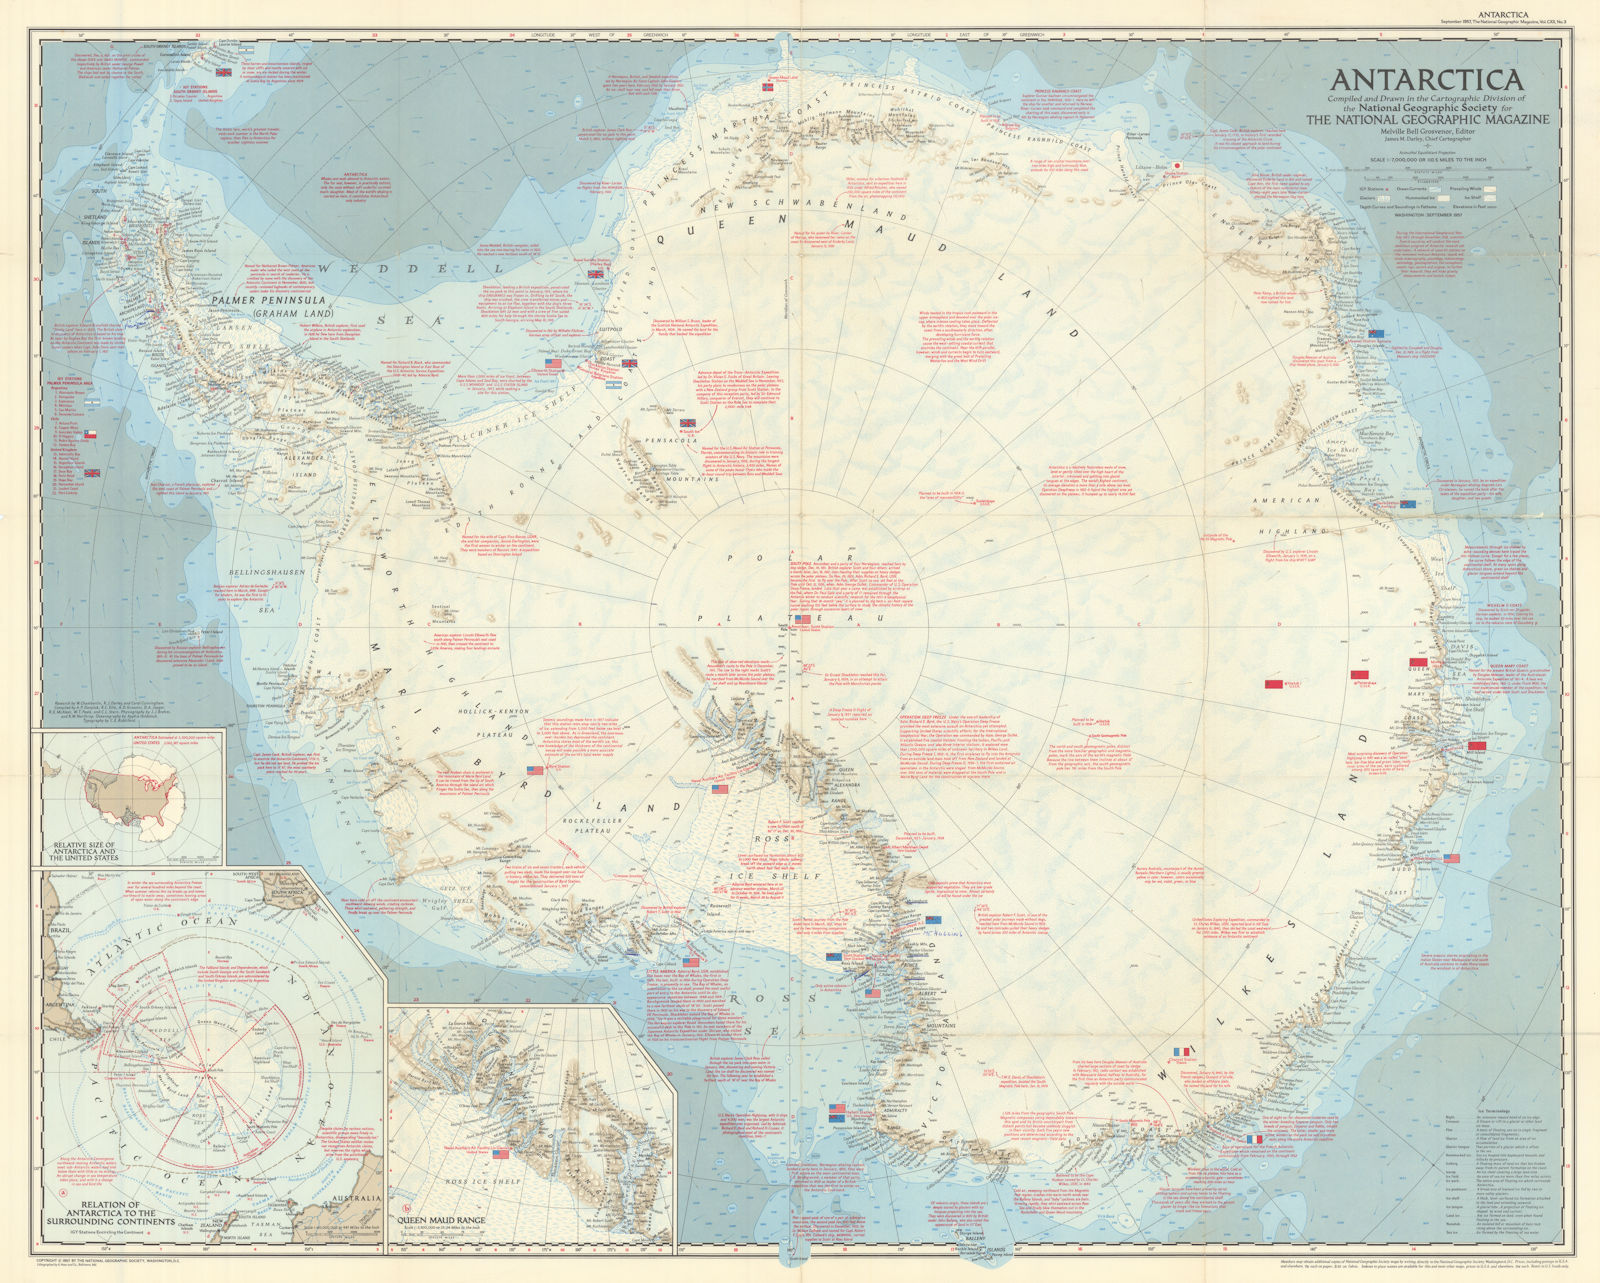 Associate Product Antarctica. National Geographic map for the International Geophysical Year 1957